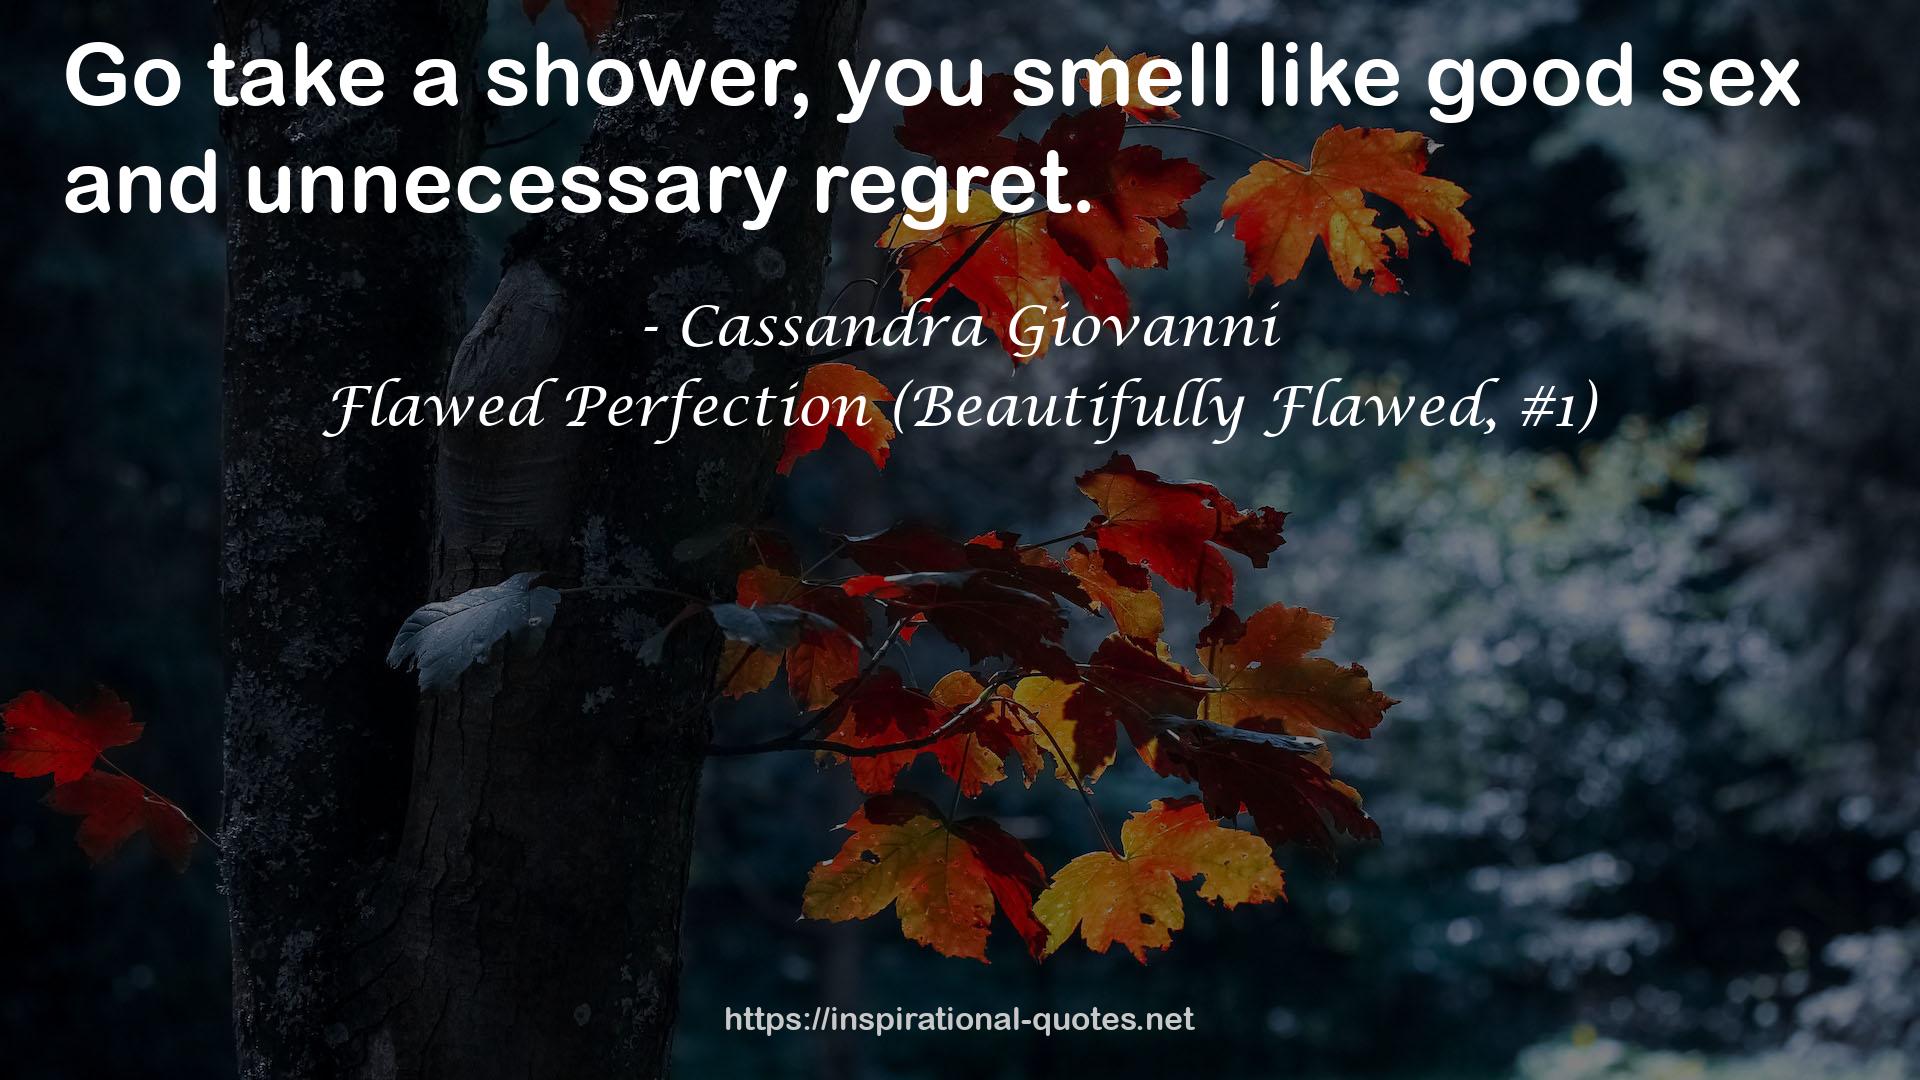 Flawed Perfection (Beautifully Flawed, #1) QUOTES